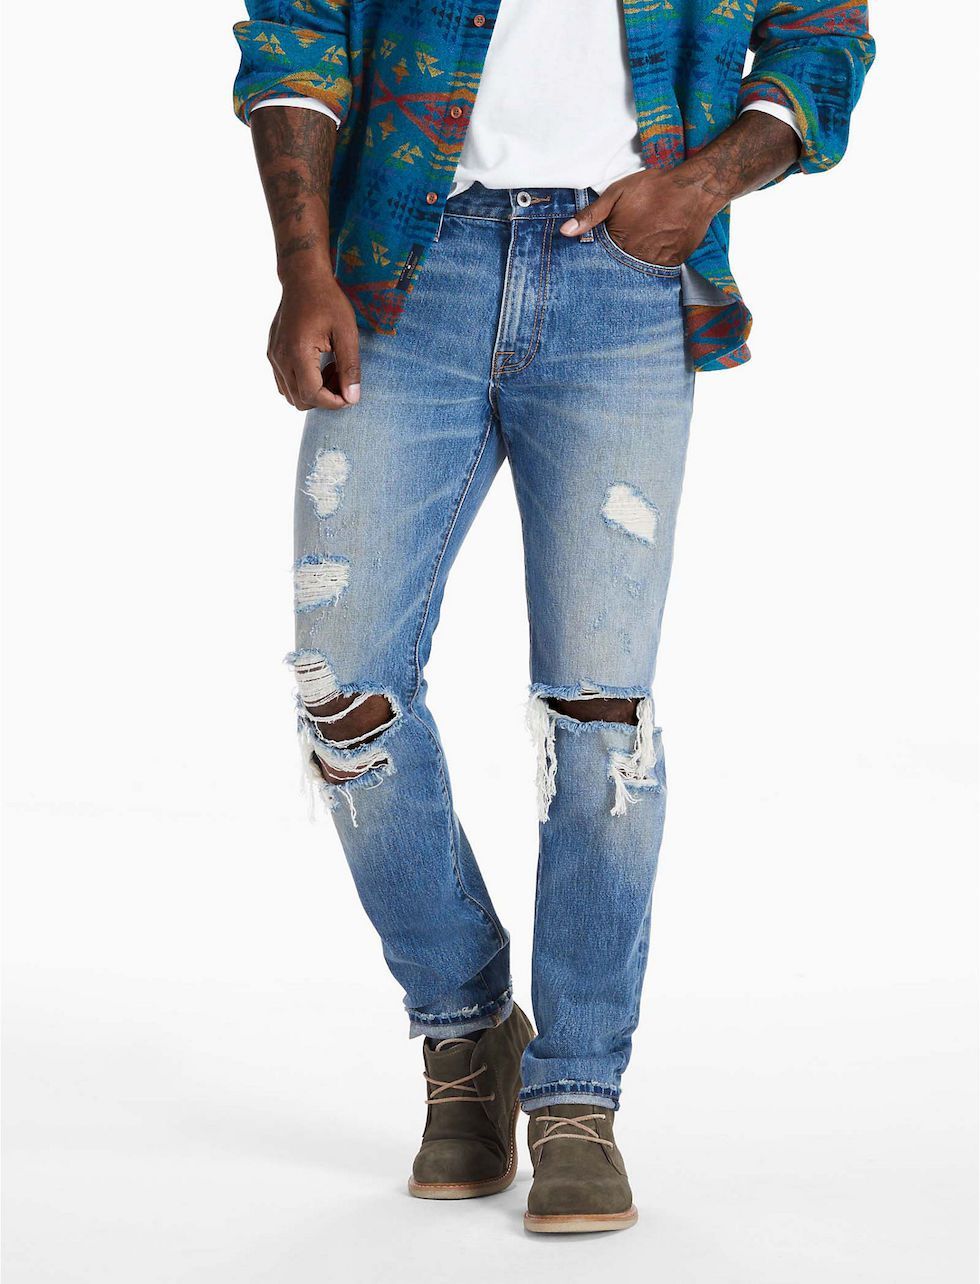 jeans similar to lucky brand